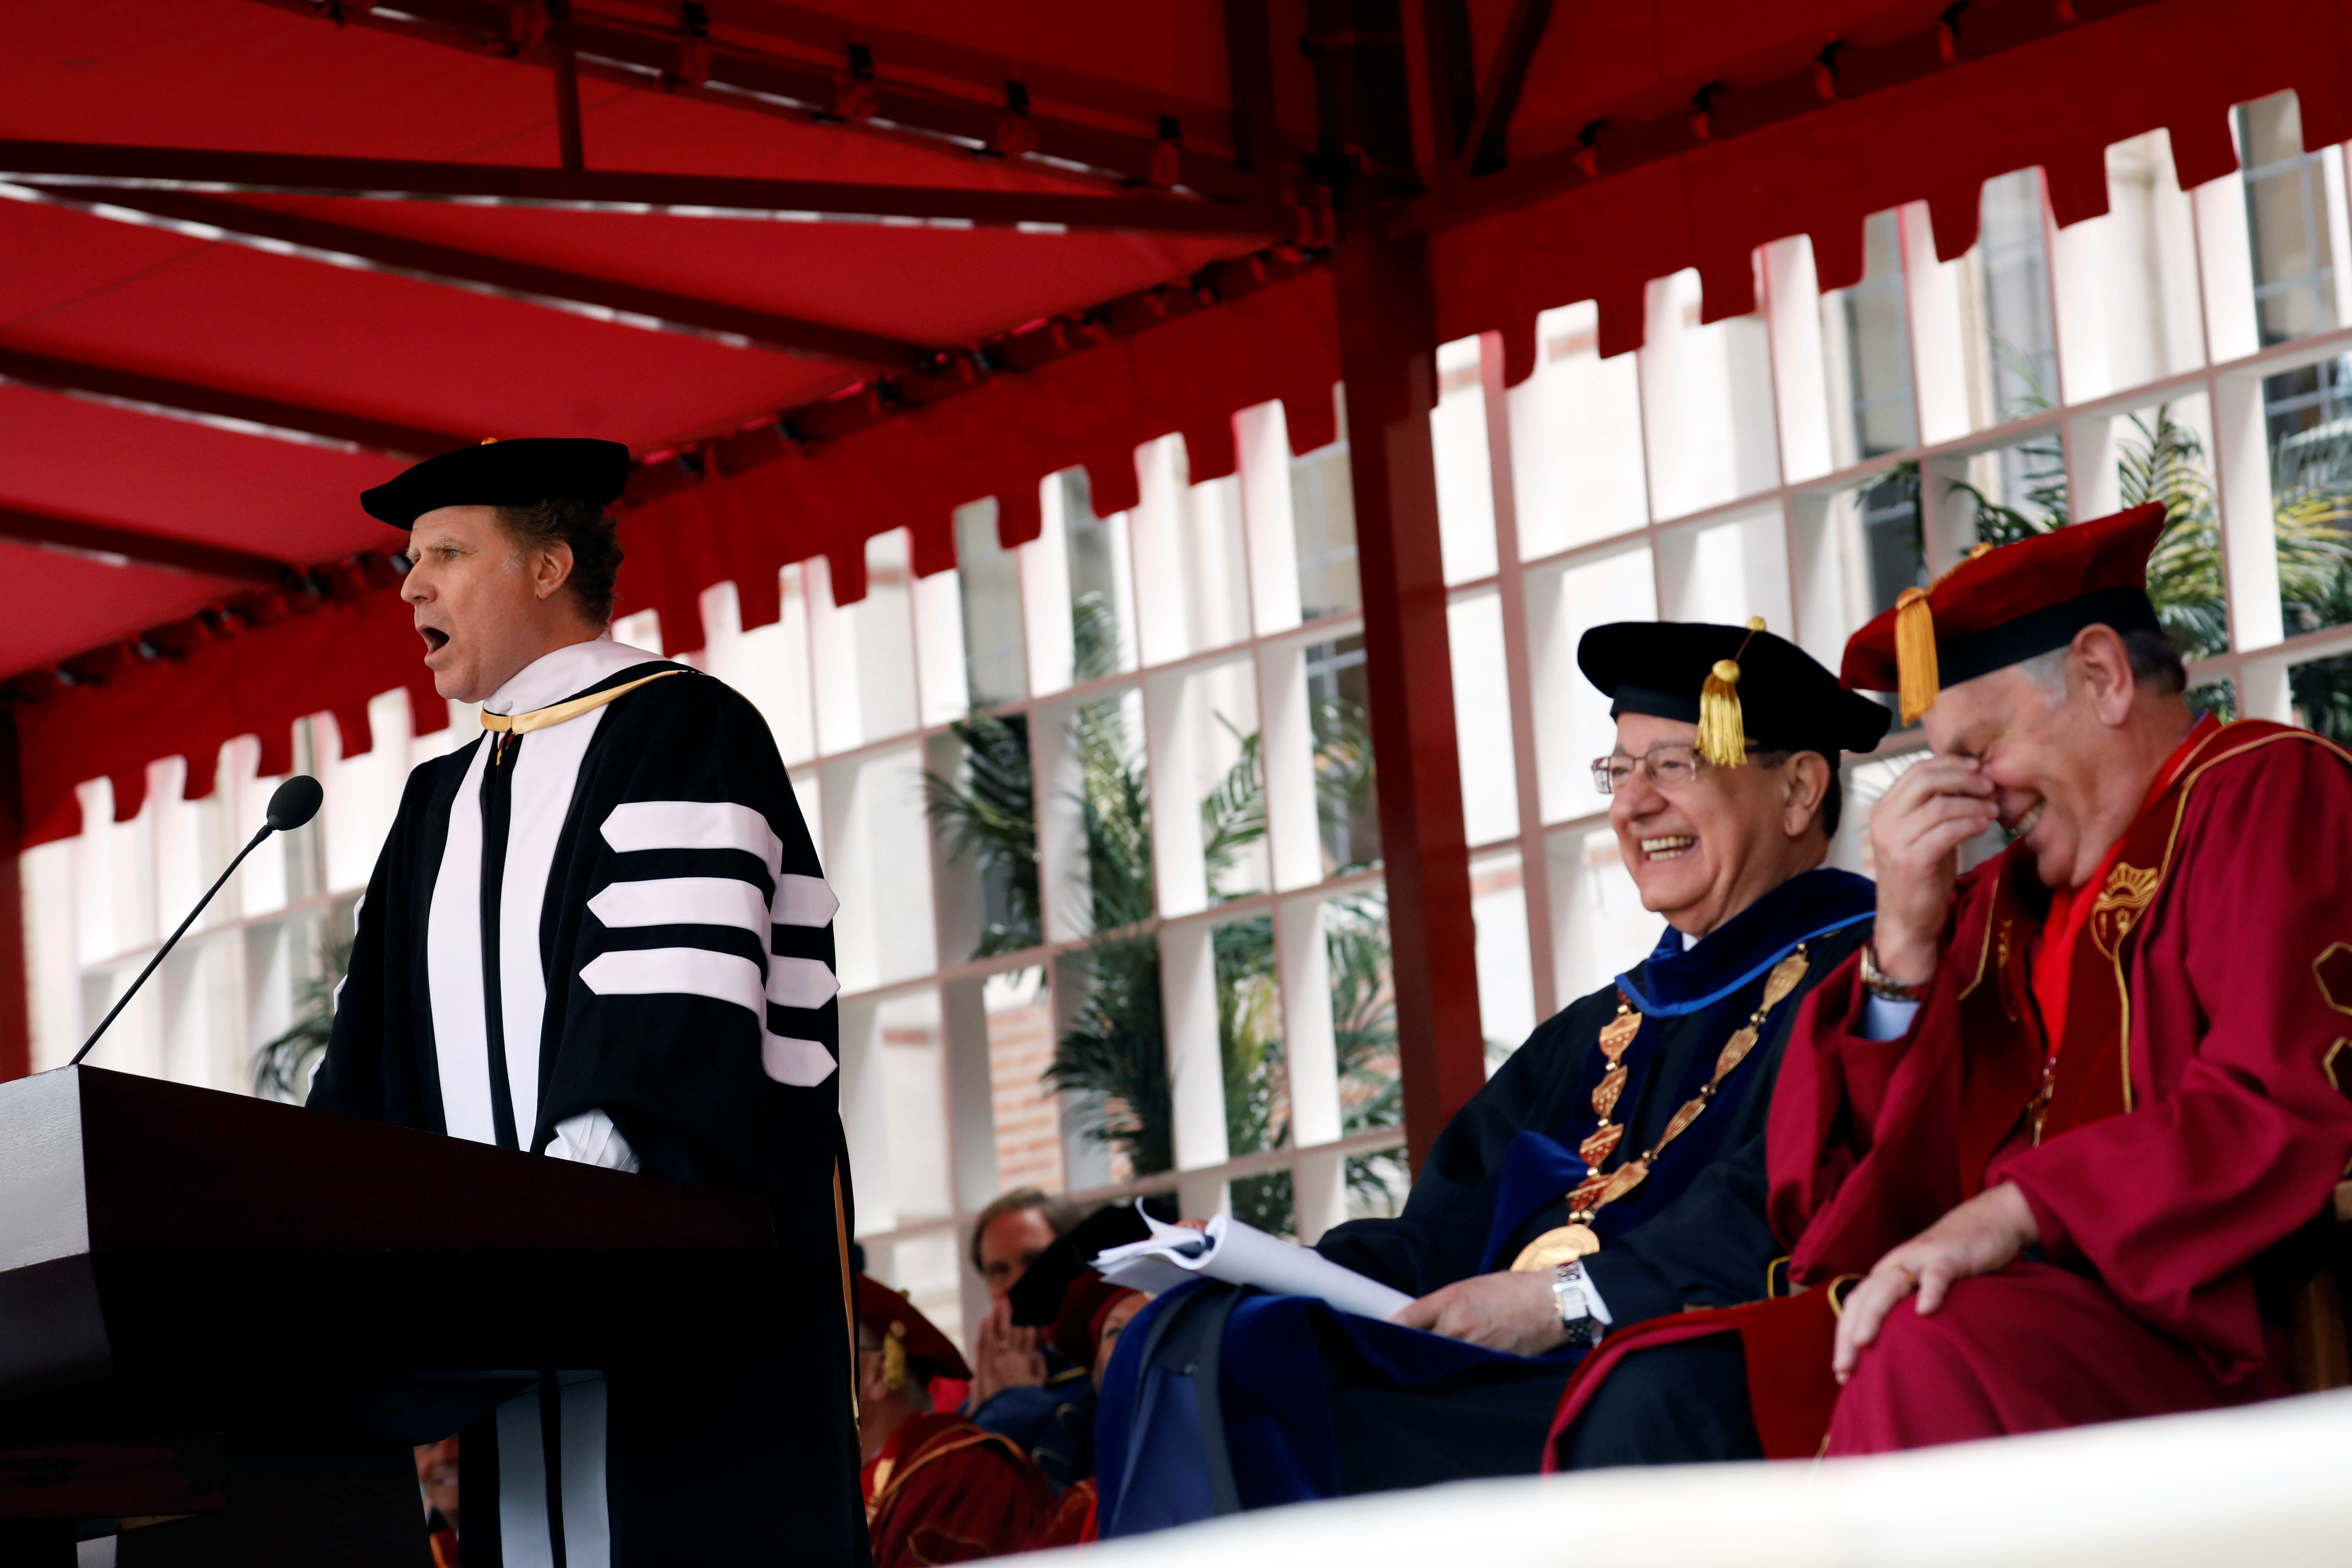 Will Ferrell gives the commencement address at USC.